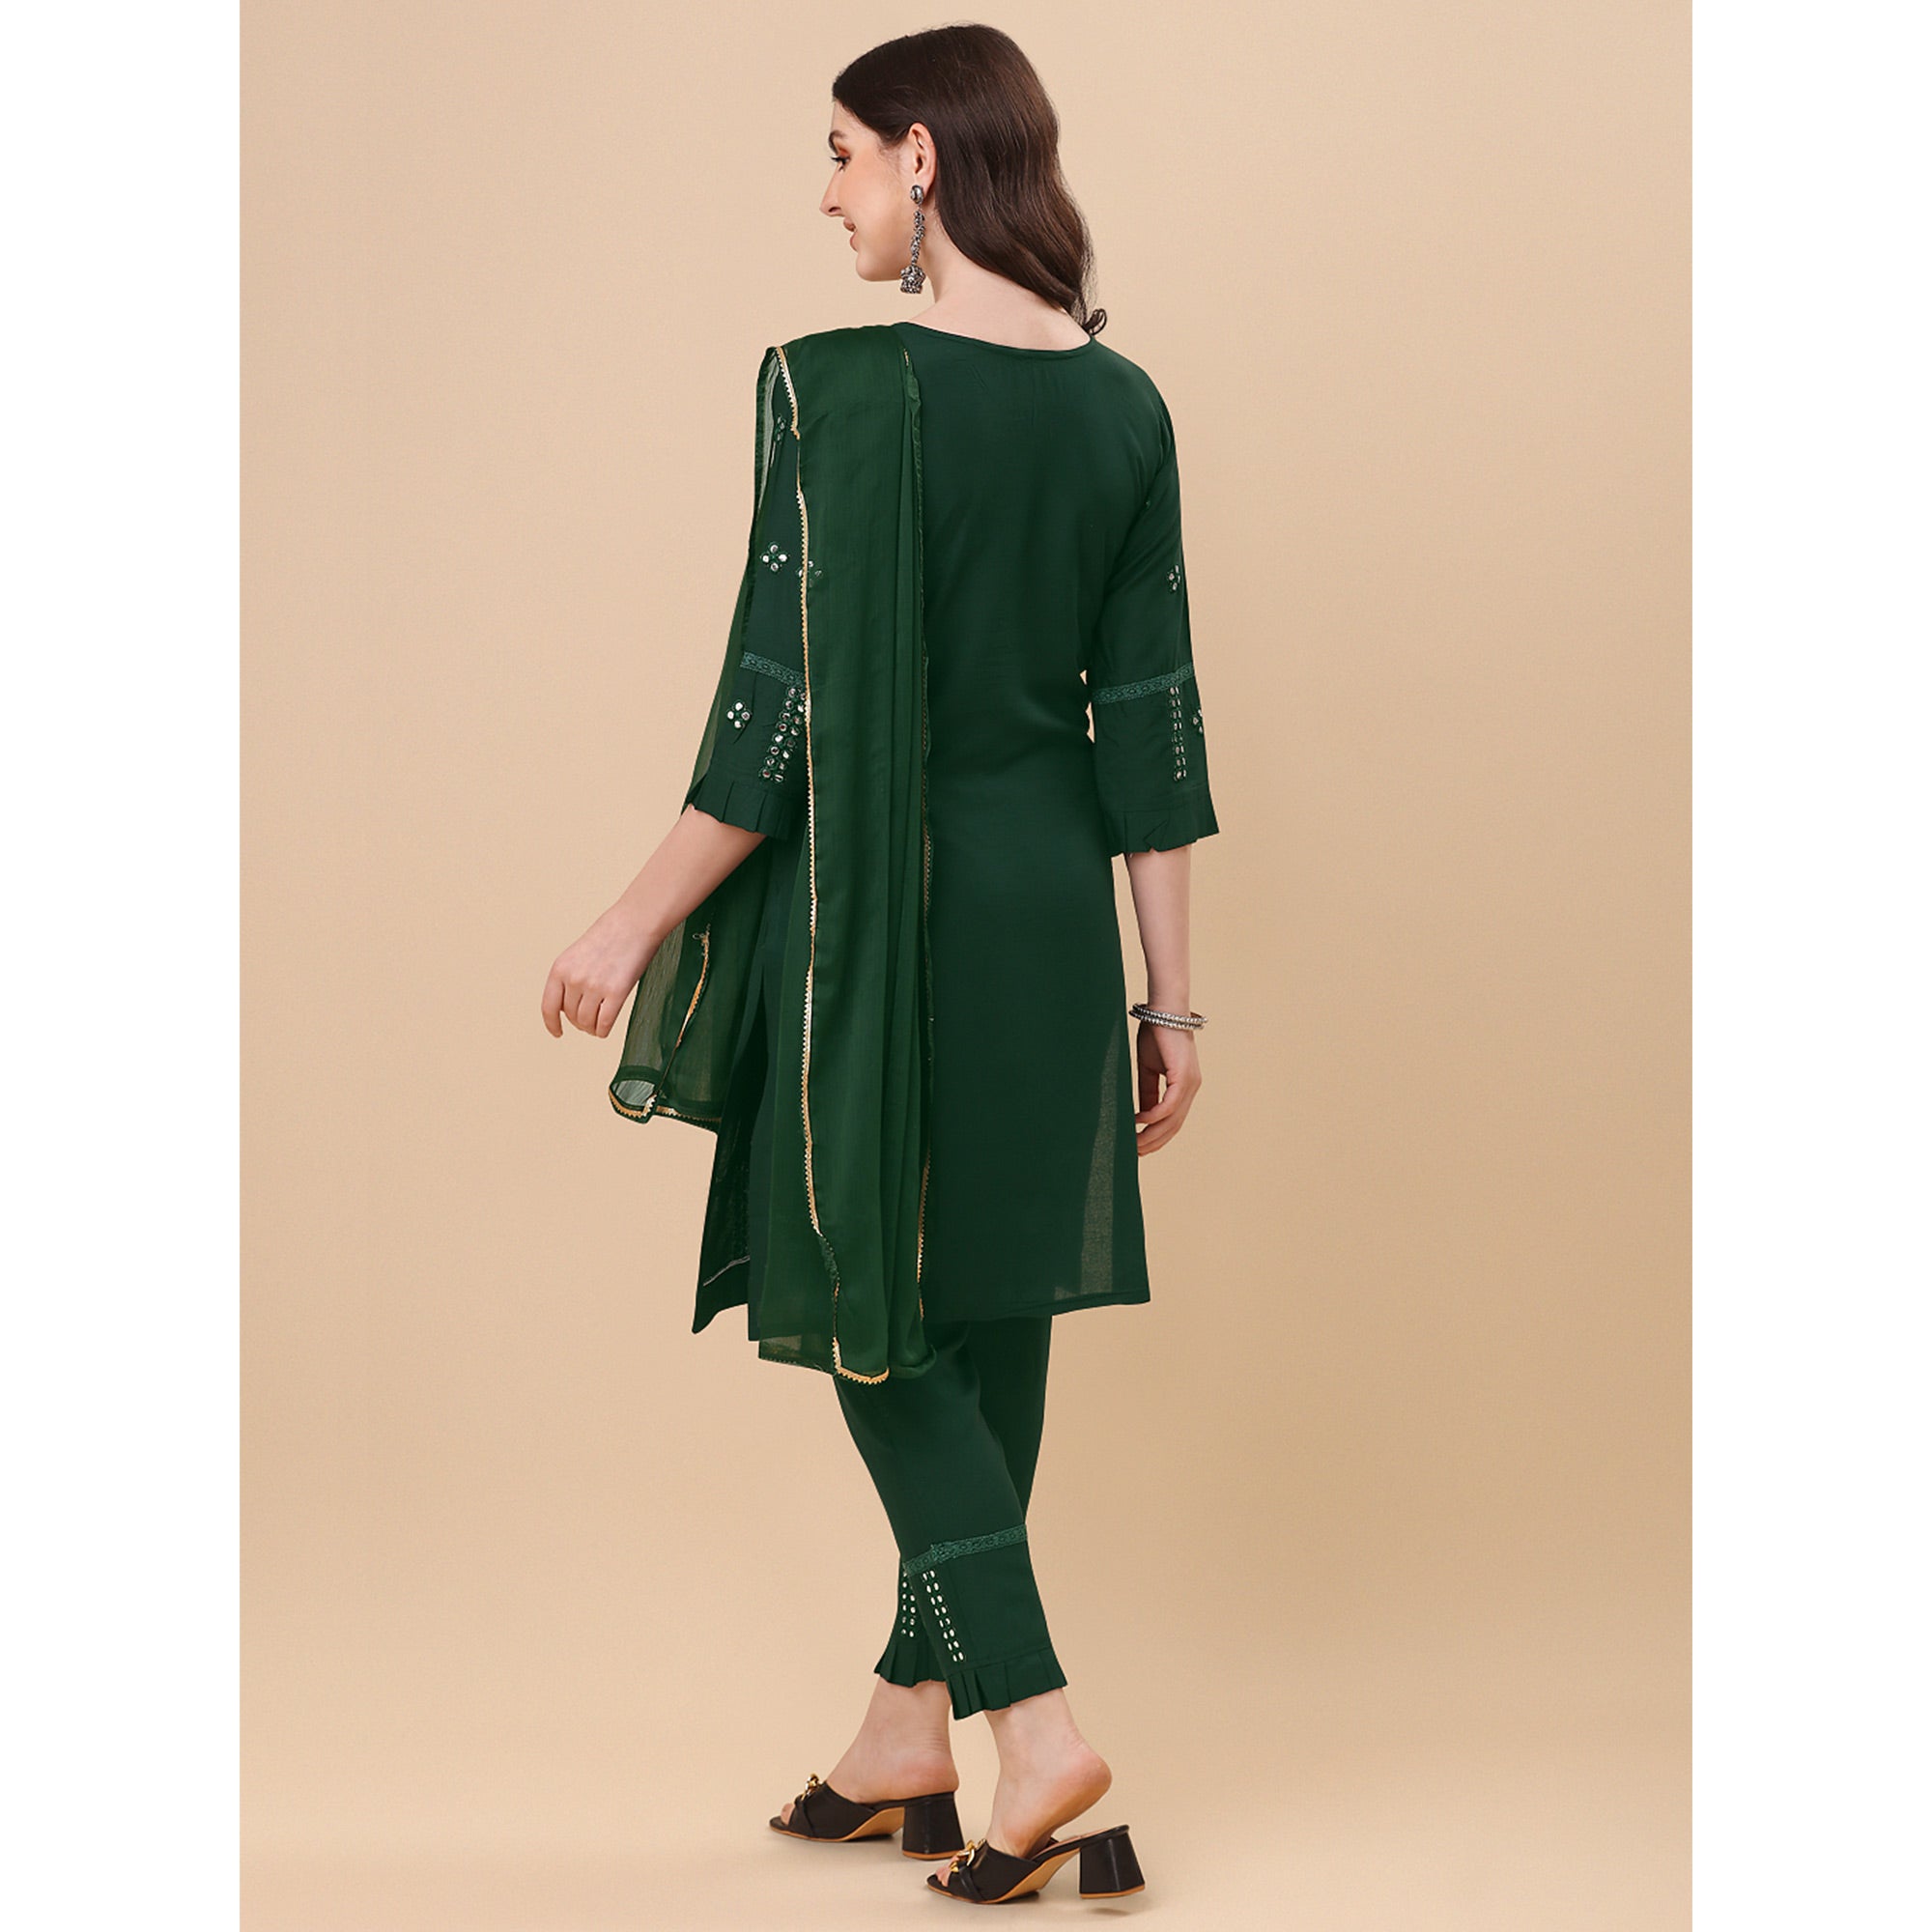 Green Embroidered Rayon Salwar Suit